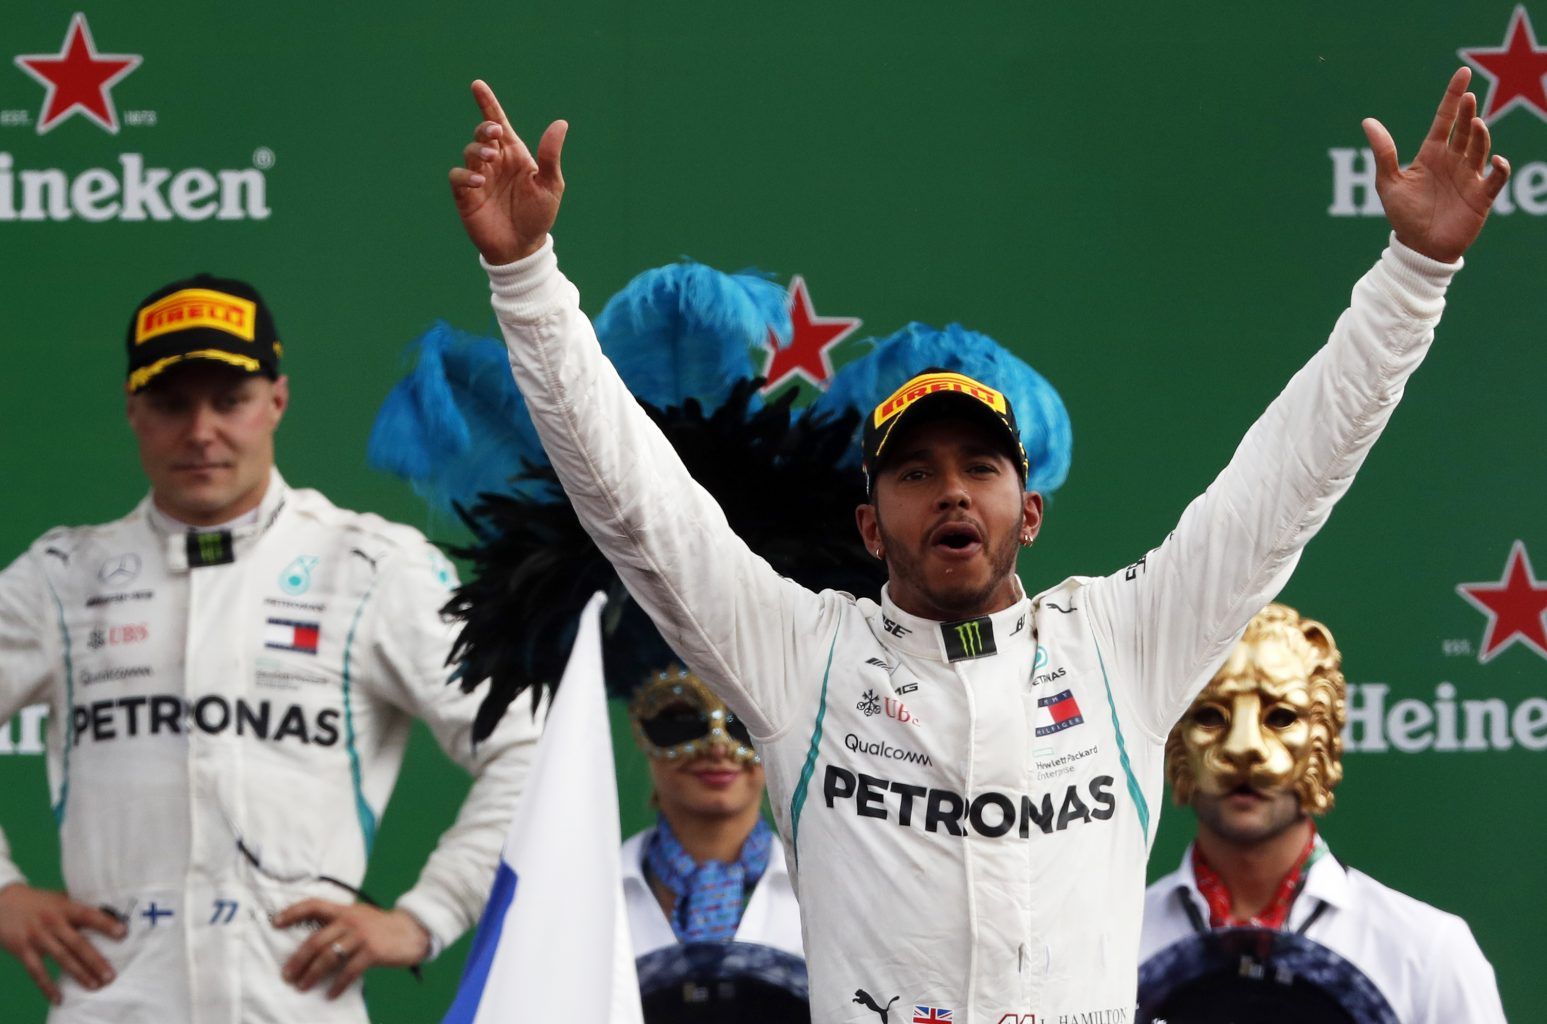 Mercedes driver Lewis Hamilton of Britain celebrates on the podium after winning the Formula One Italy Grand Prix at the Monza racetrack